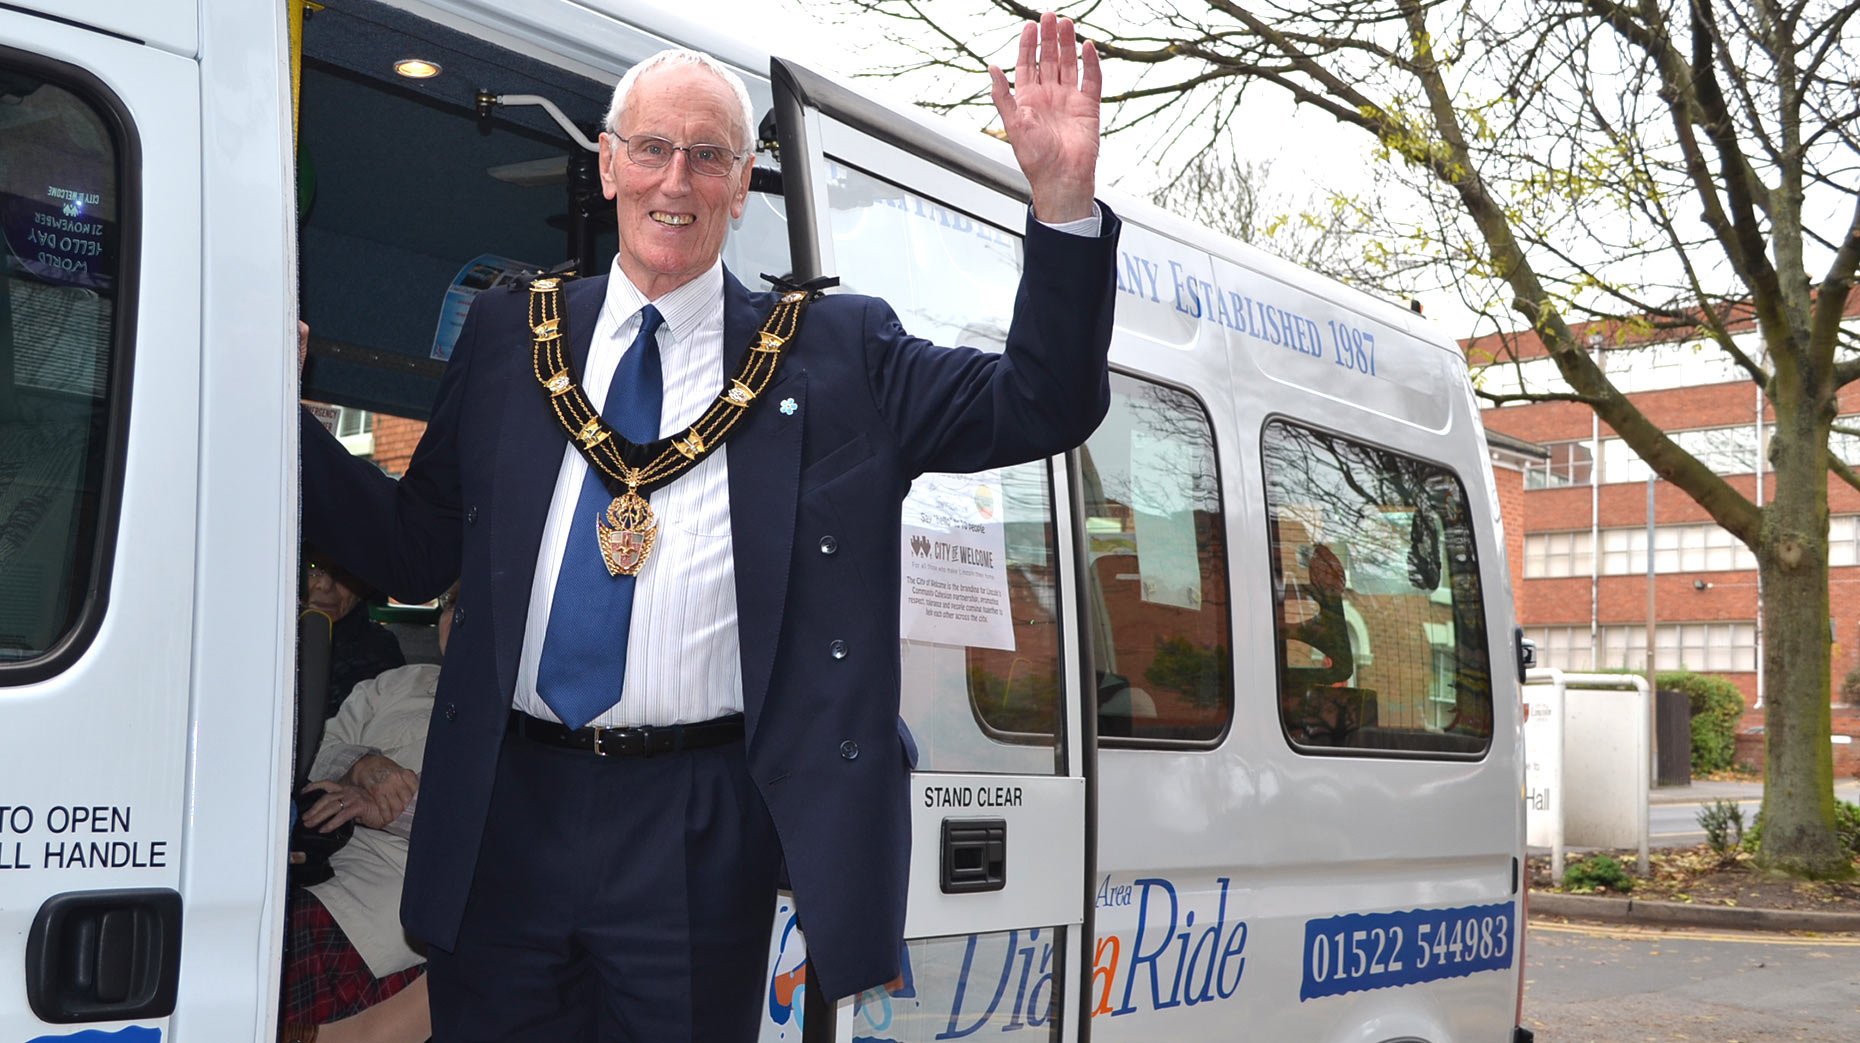 Mayor of Lincoln Councillor Brent Charlesworth got behind the World Hello Day action, alongside his chosen charities Dial-a-Ride and Age UK. Photo: Emily Norton